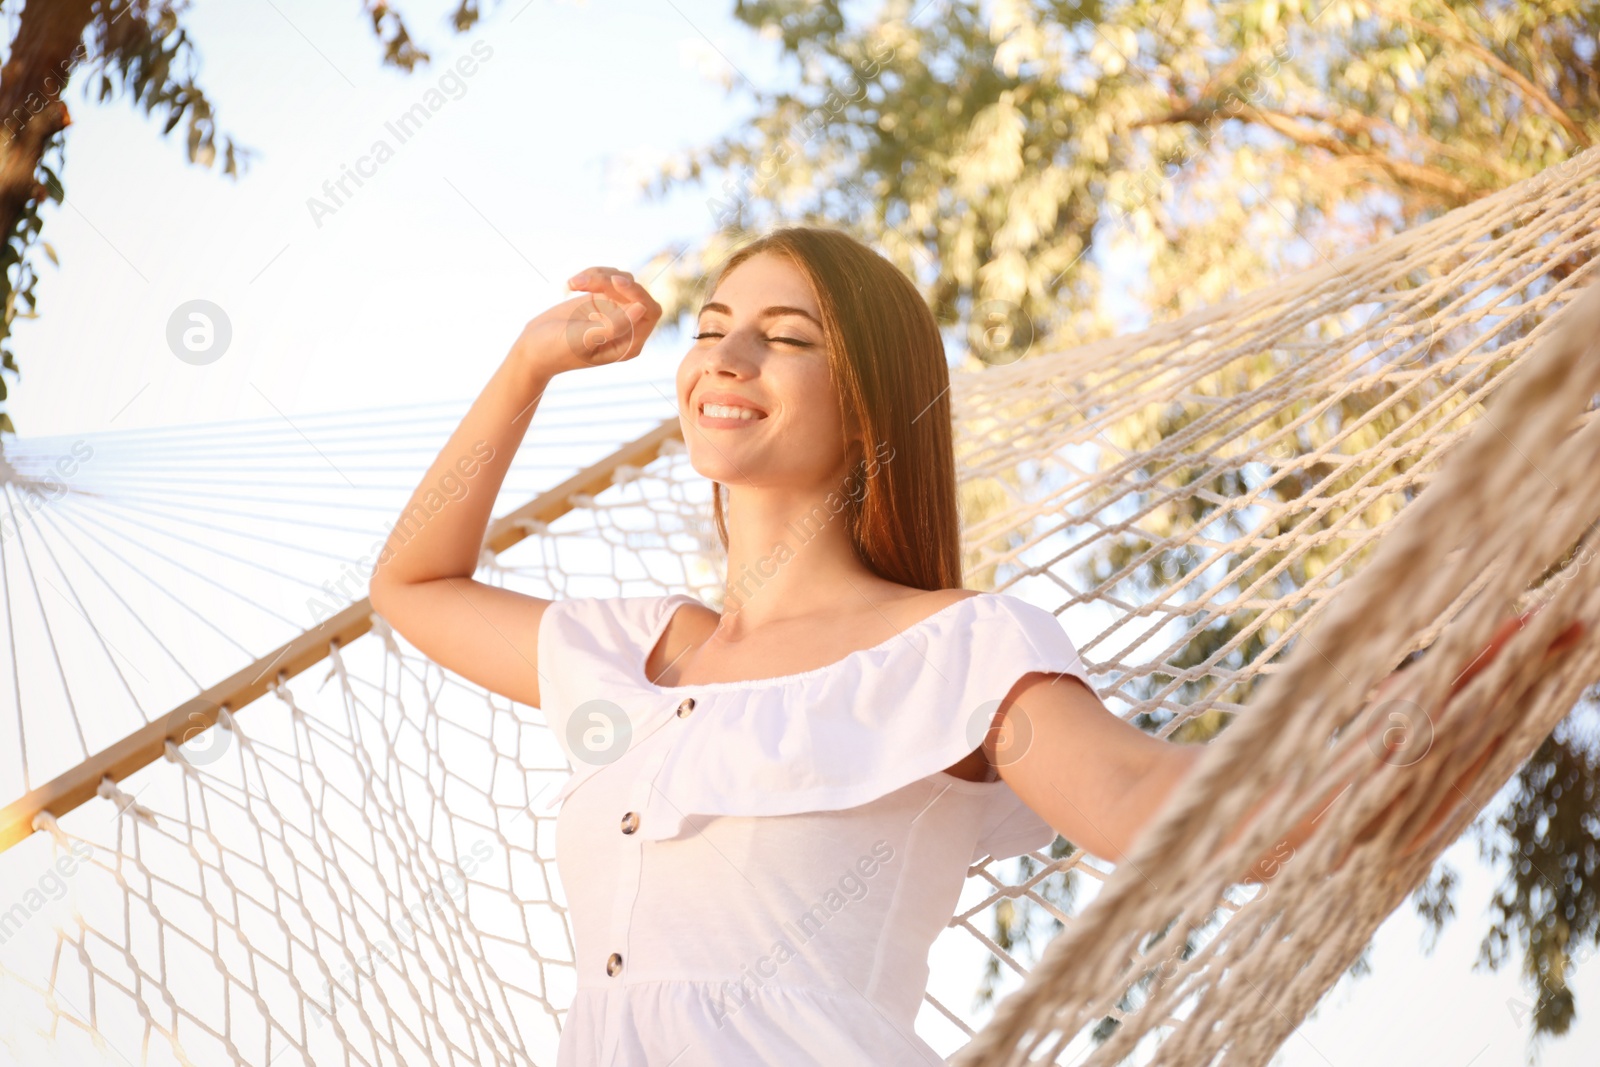 Photo of Young woman stretching in hammock on beach. Summer vacation